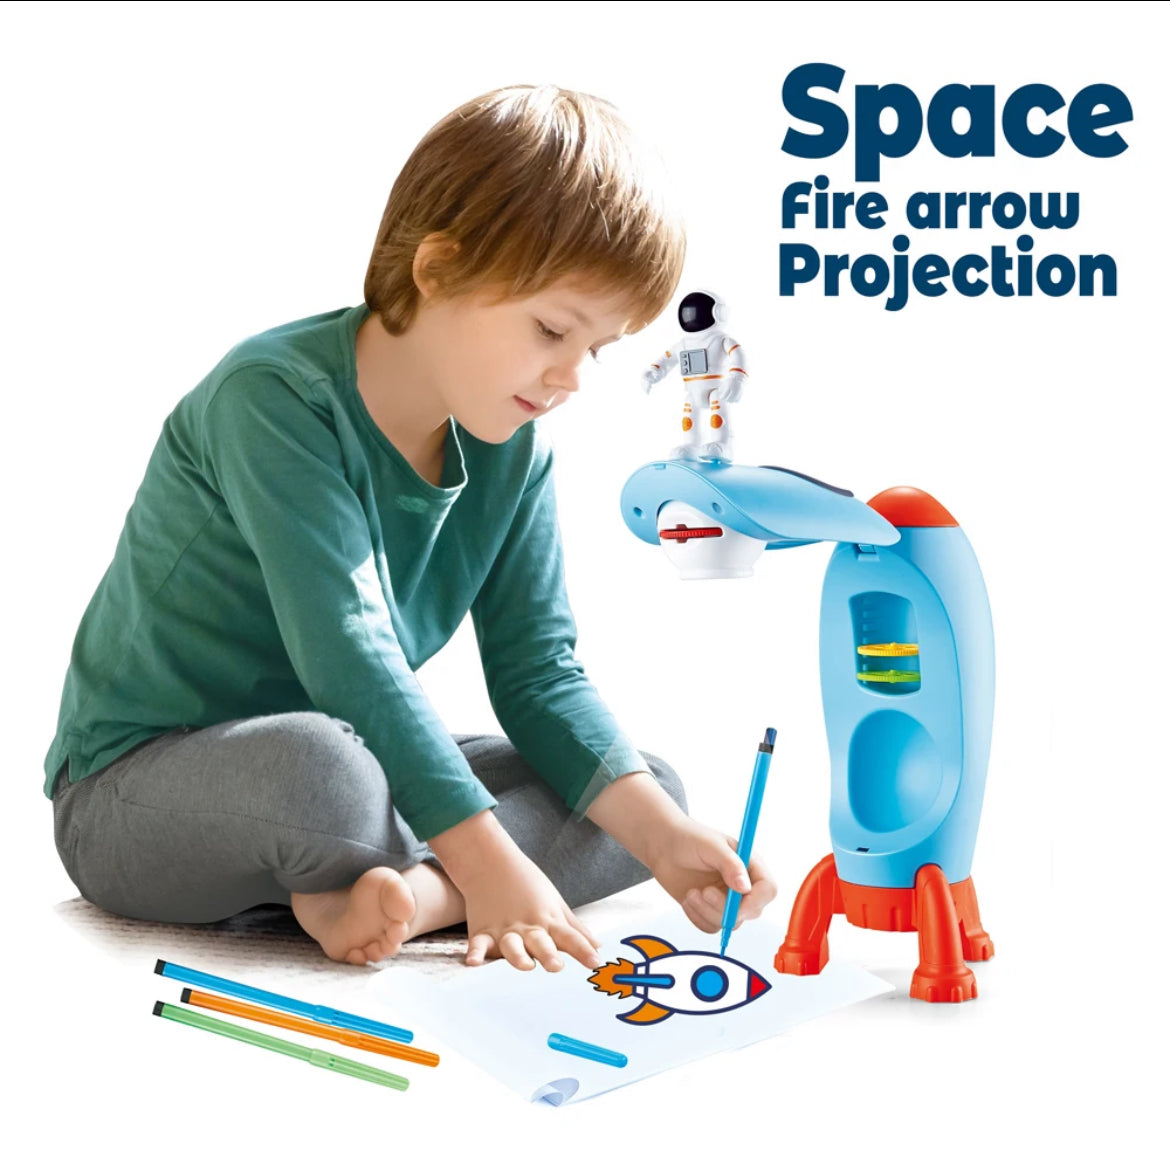 Space fire arrow projector, accurate and the best drawings for your tots